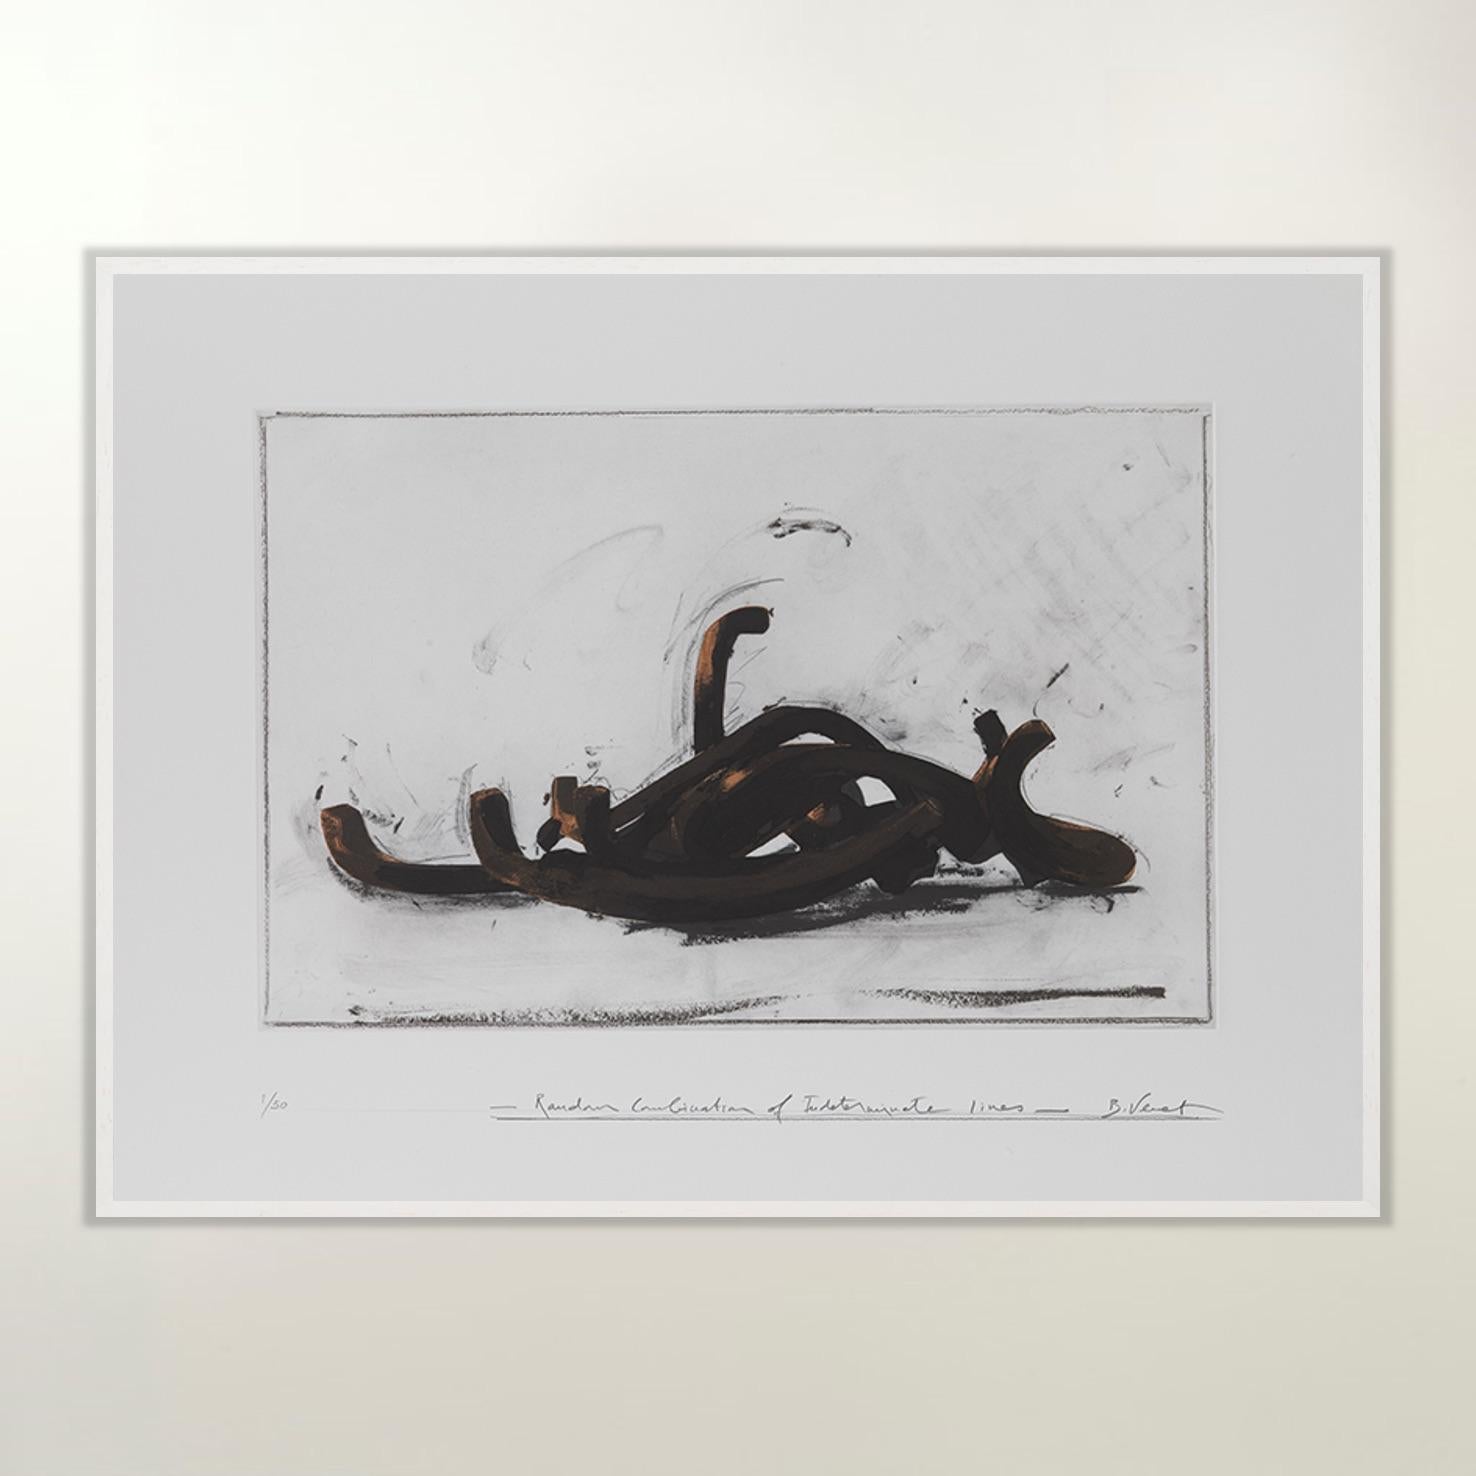 Random Combination of Indeterminate Lines - Contemporary, 21st Century, Etching - Gray Figurative Print by Bernar Venet